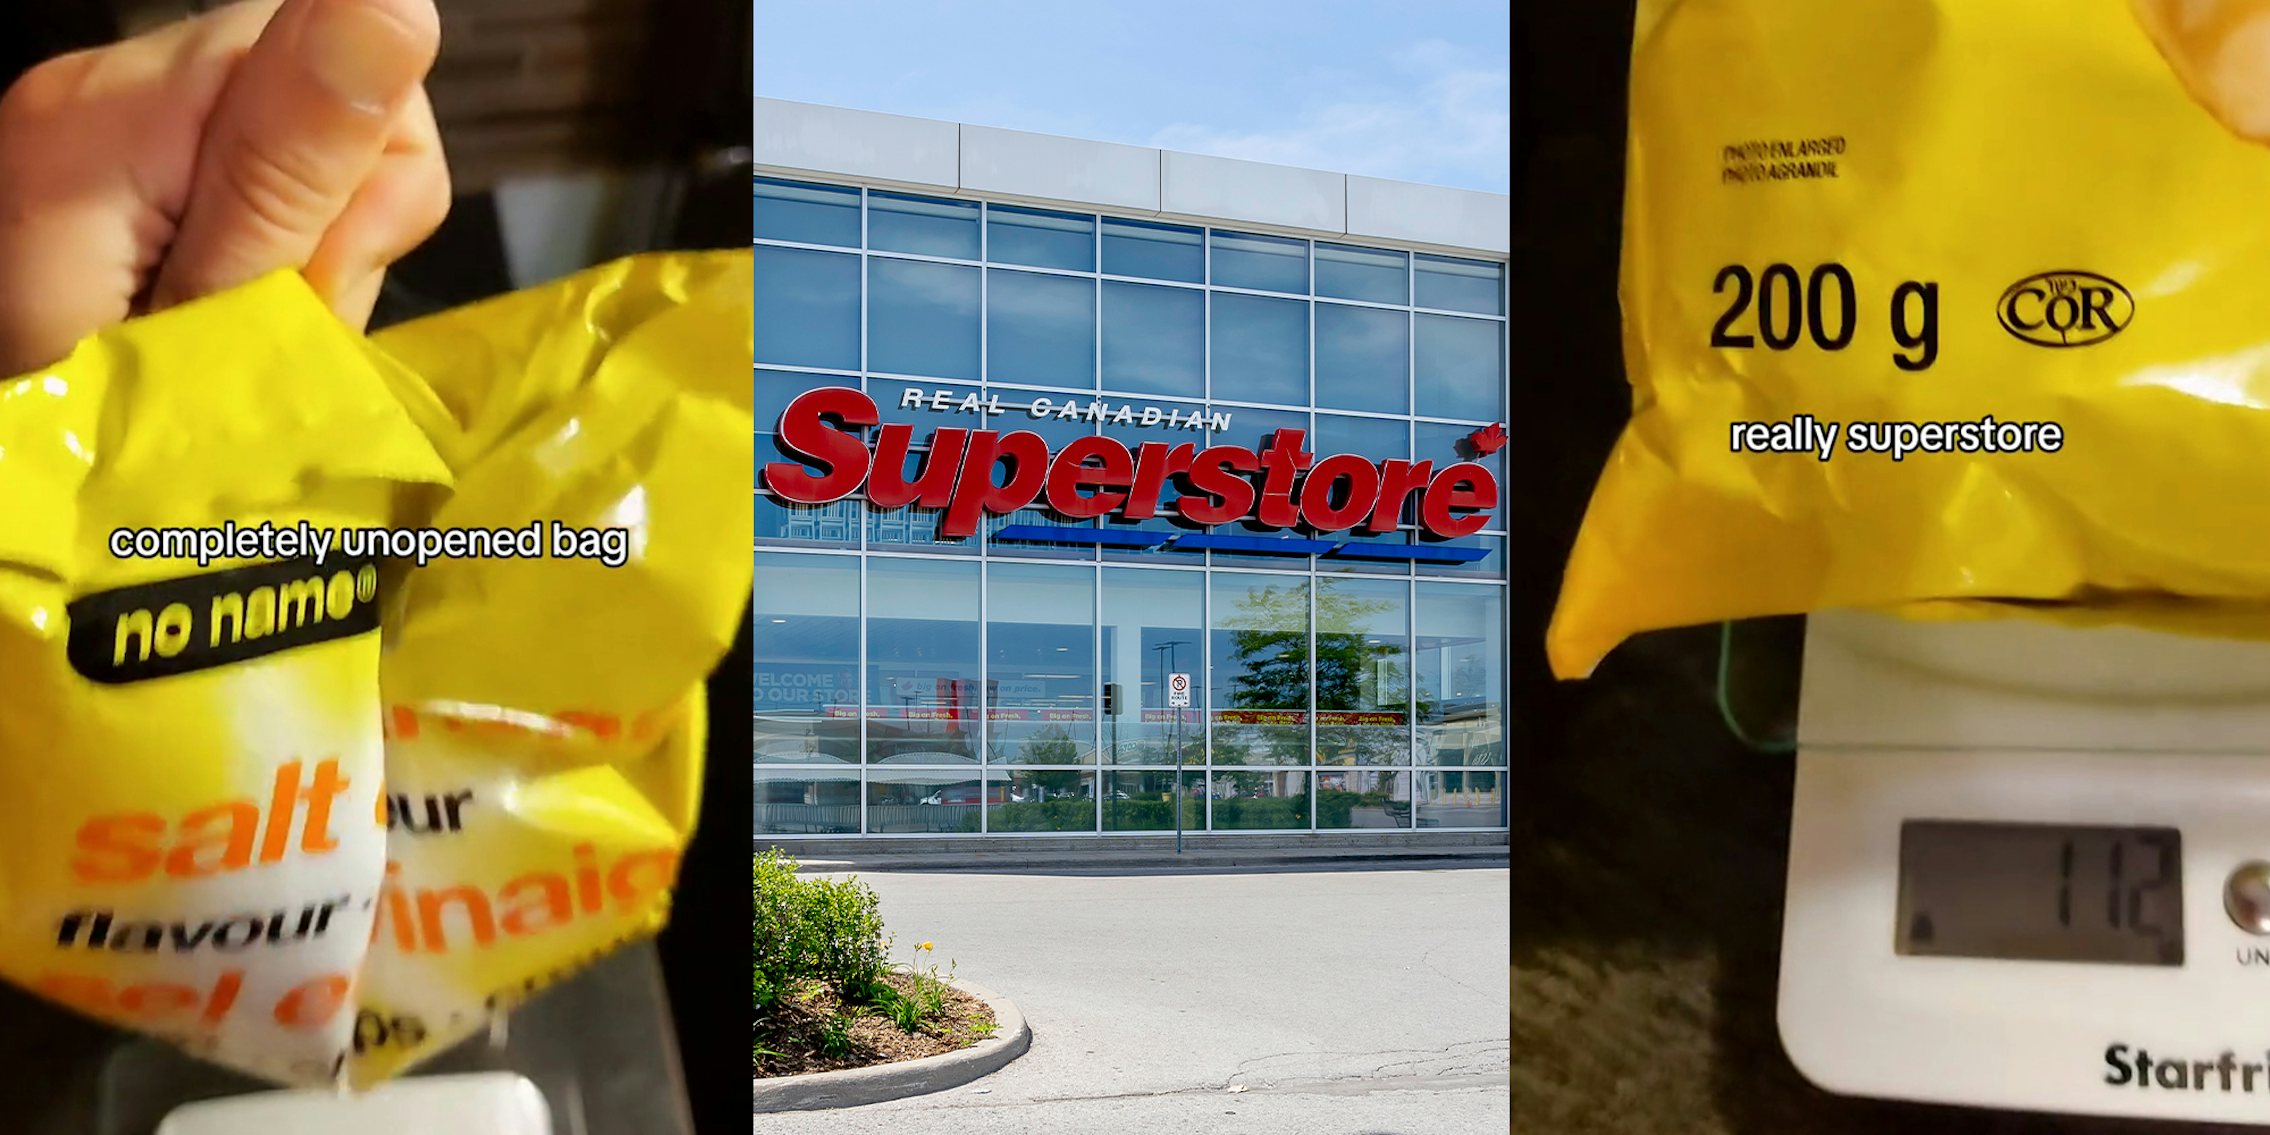 Shopper catches Superstore selling underweight chip bag